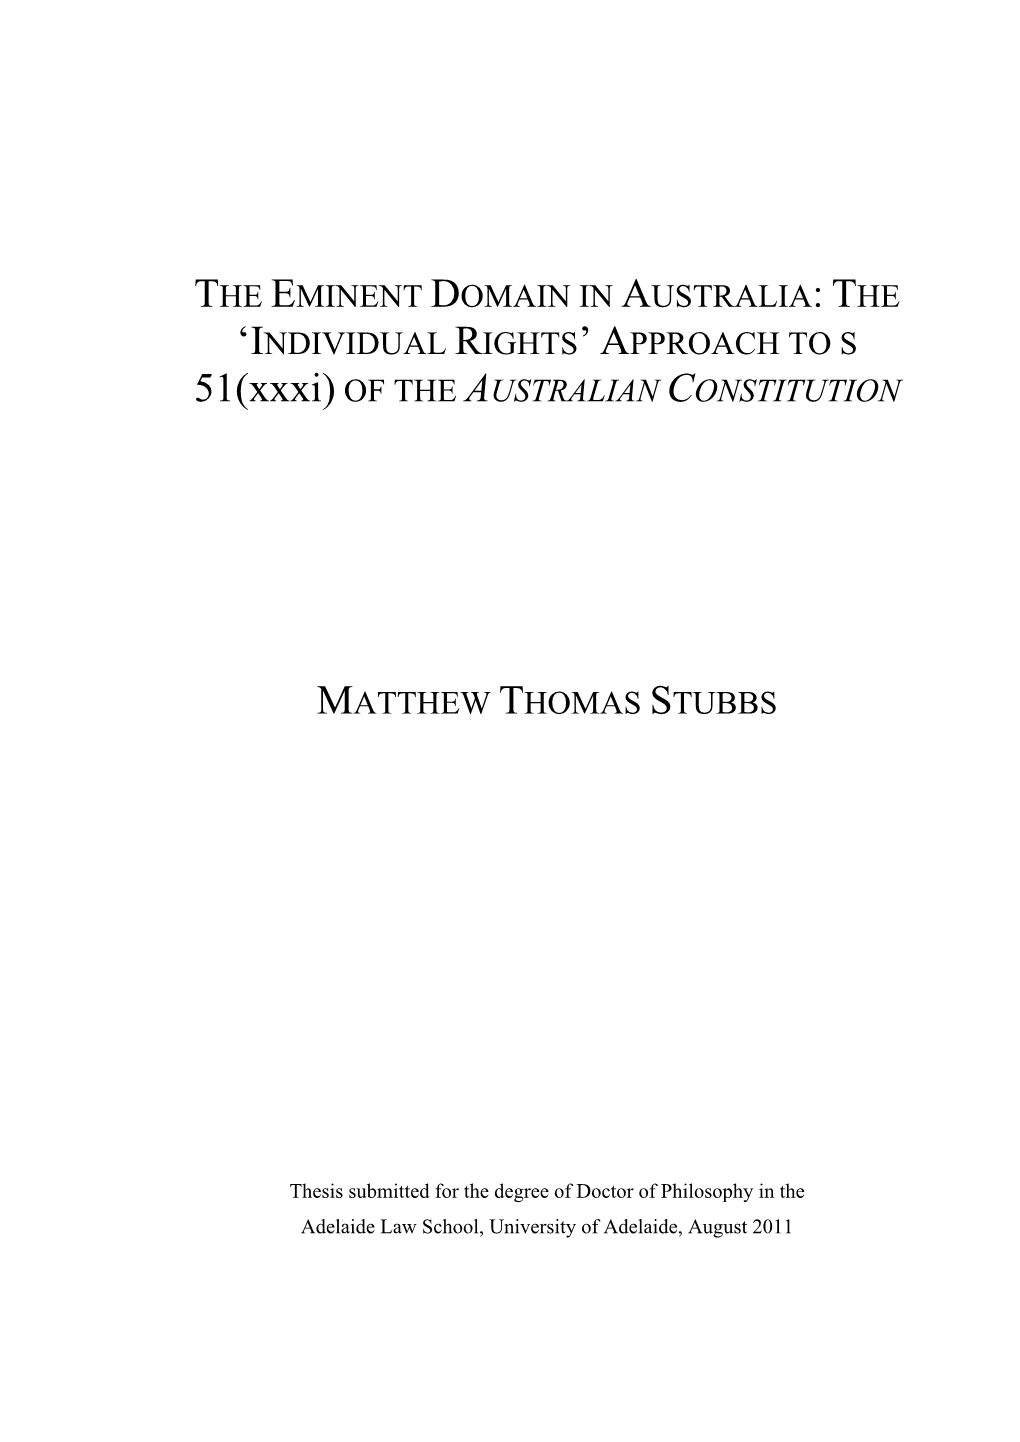 THE EMINENT DOMAIN in AUSTRALIA: the ‘INDIVIDUAL RIGHTS’ APPROACH to S 51(Xxxi) of the AUSTRALIAN CONSTITUTION